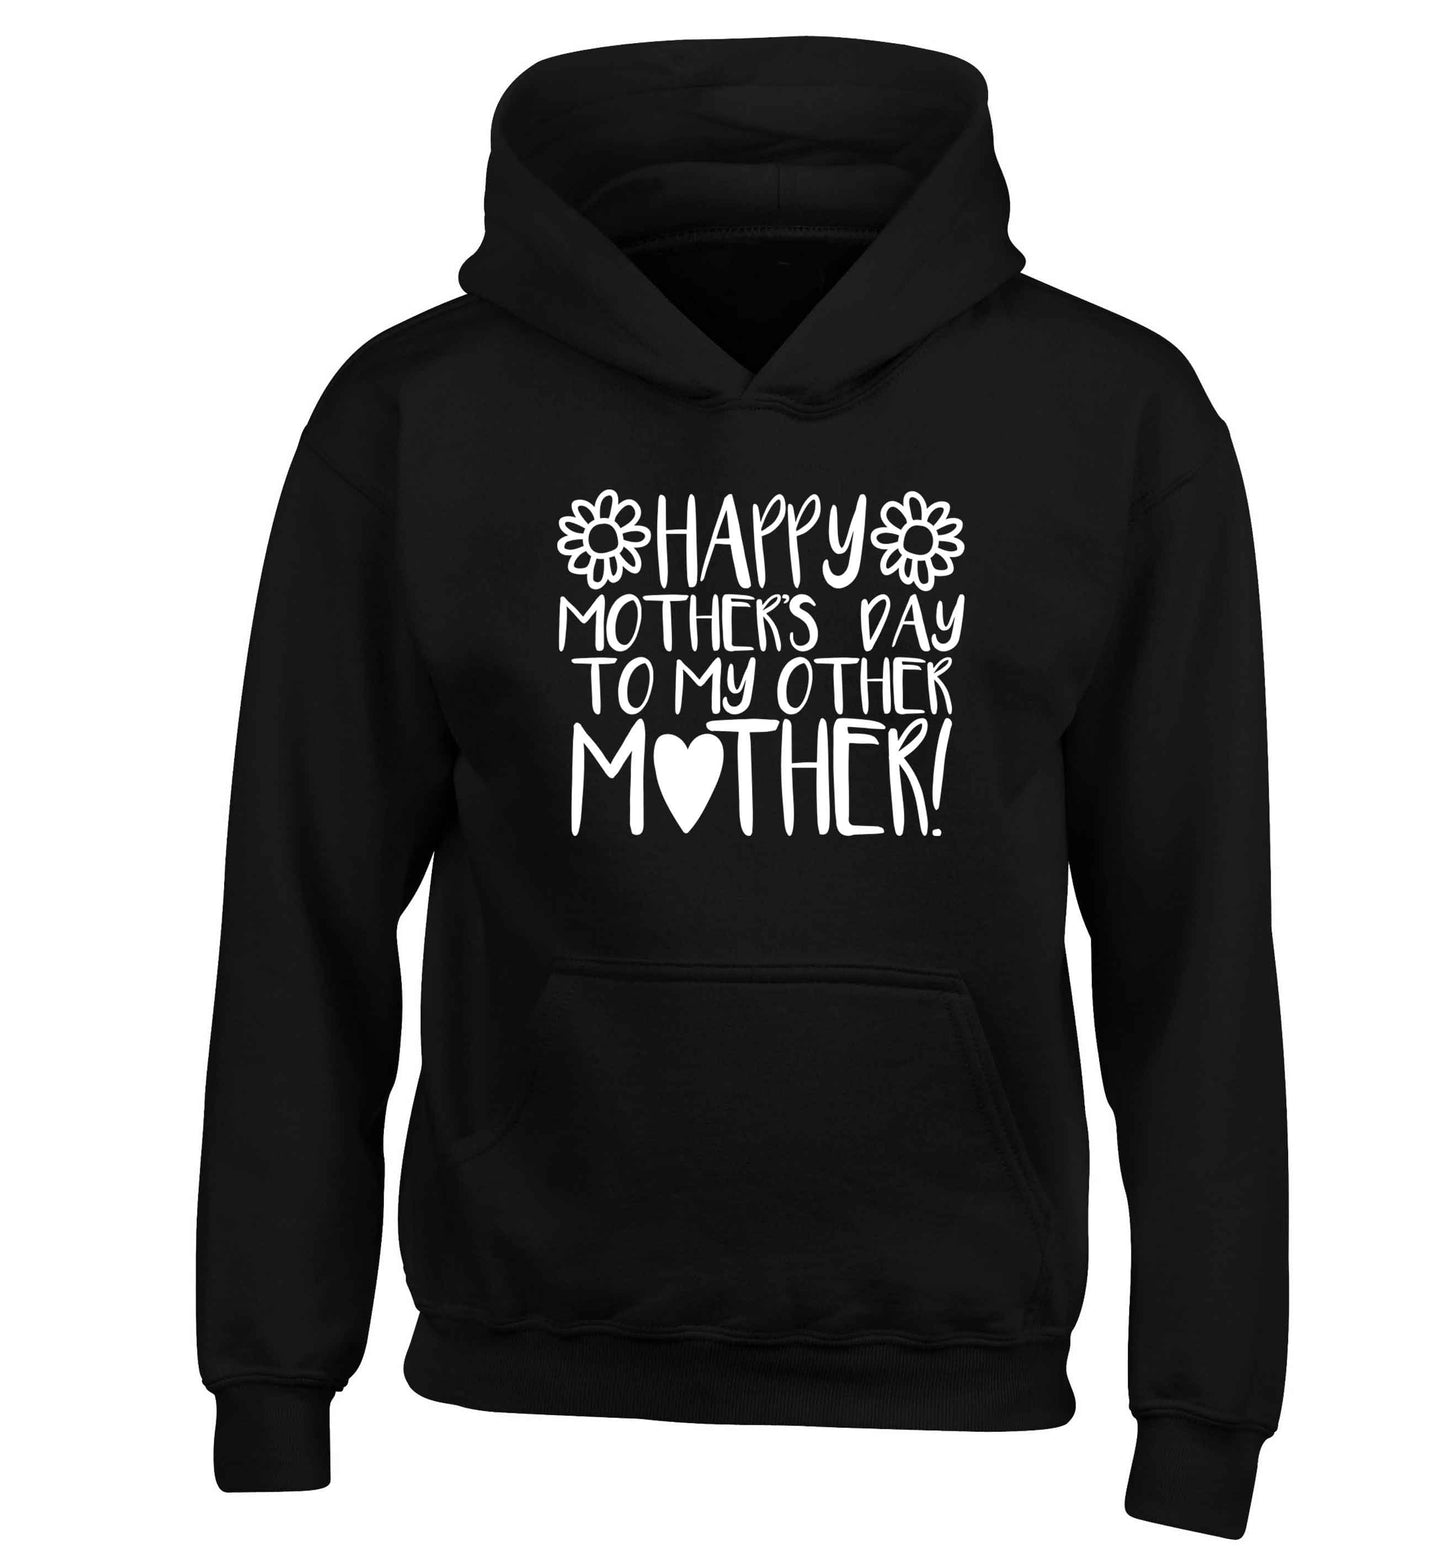 Happy mother's day to my other mother children's black hoodie 12-13 Years